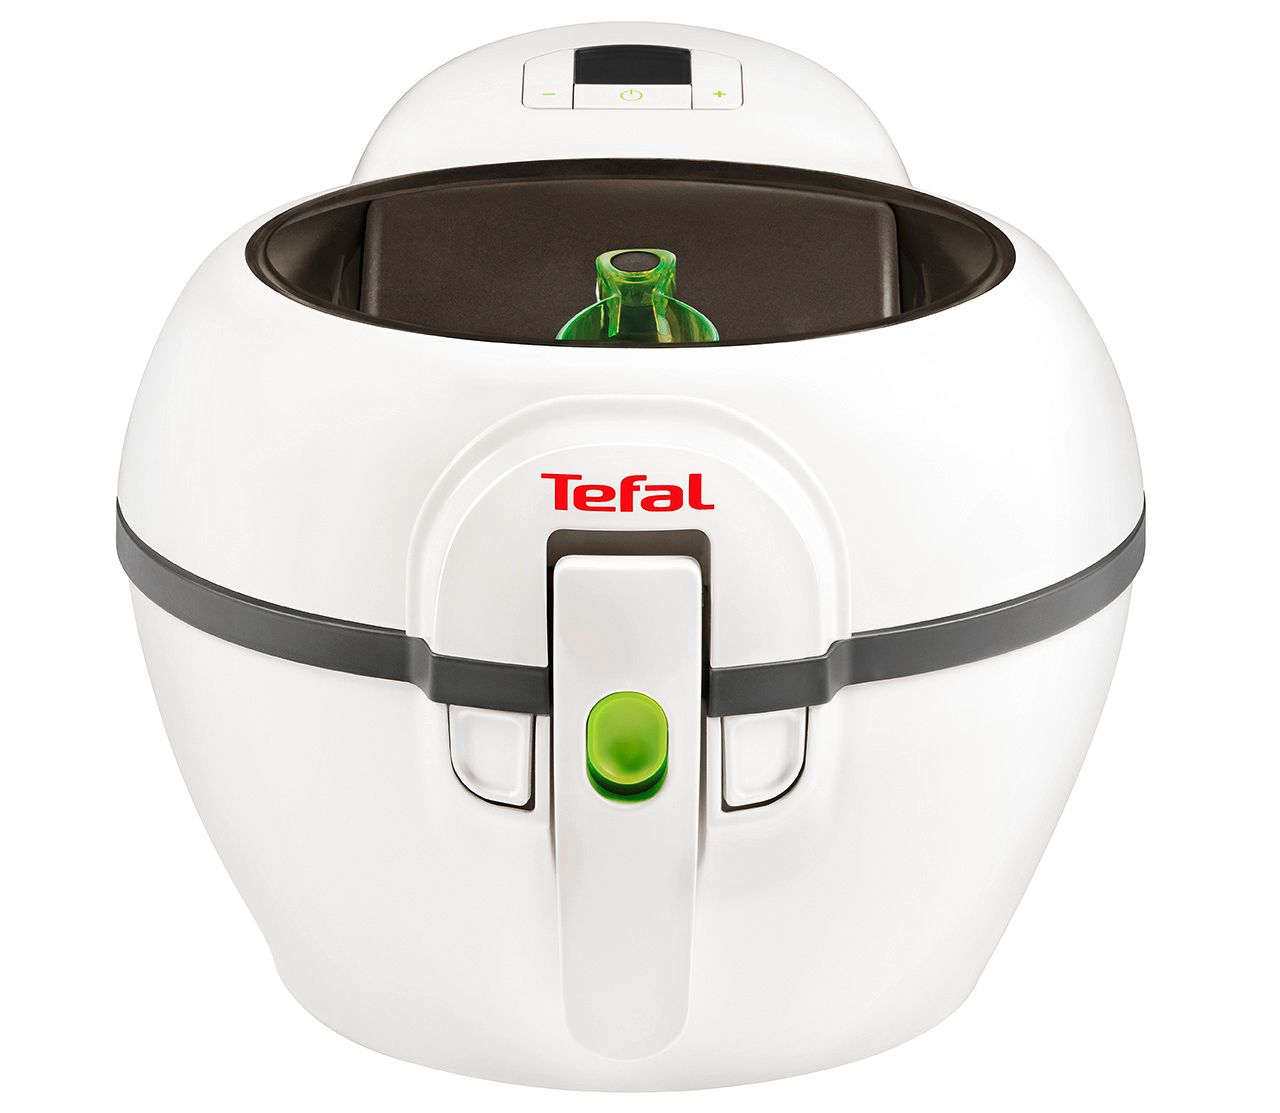 tefal actifry mini launched for smaller kitchens 21 per cent more compact 25 per cent faster image 2